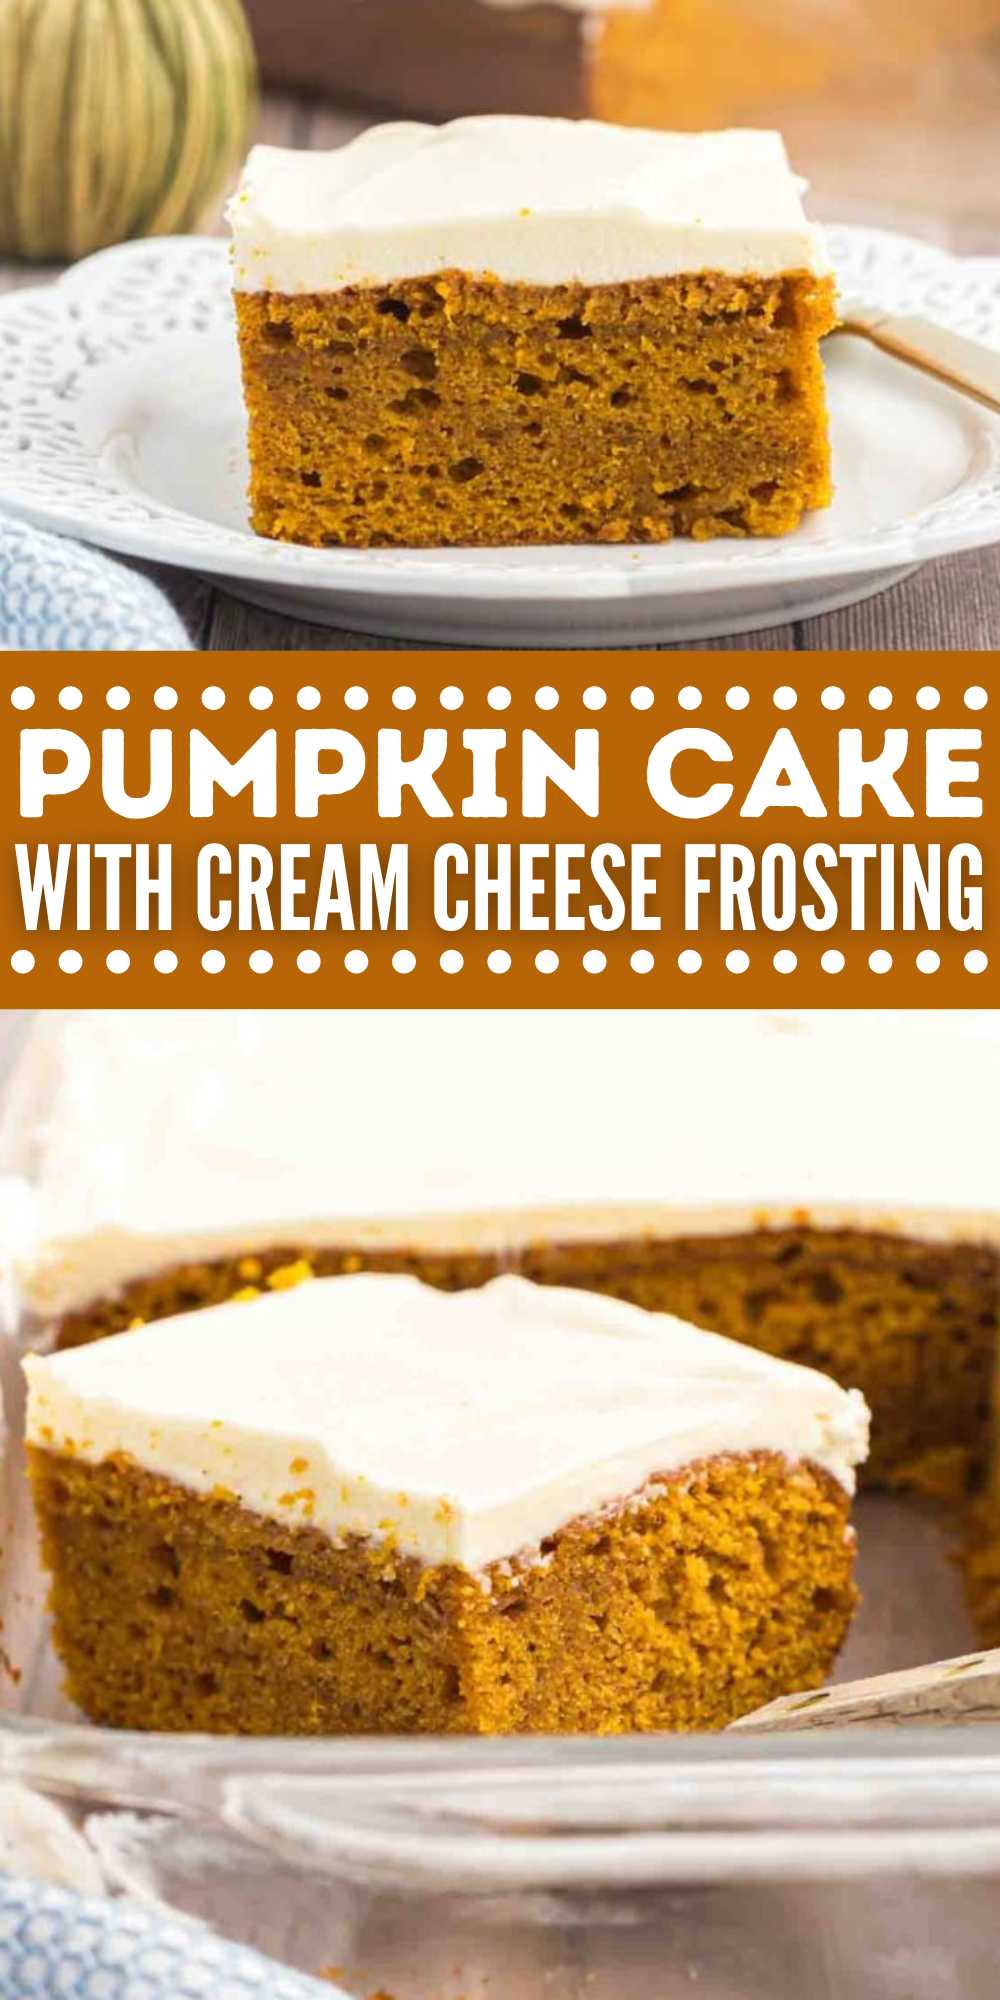 Pumpkin Cake with Cream Cheese Frosting is the best fall dessert. If you are a fan of pumpkin desserts, then you need to make this recipe.  We love pumpkin recipes and this is one of my favorites. Impress your family and friends this holiday and make this delicious dessert. #eatingonadime #pumpkincakewithcreamcheesefrosting #pumpkincake